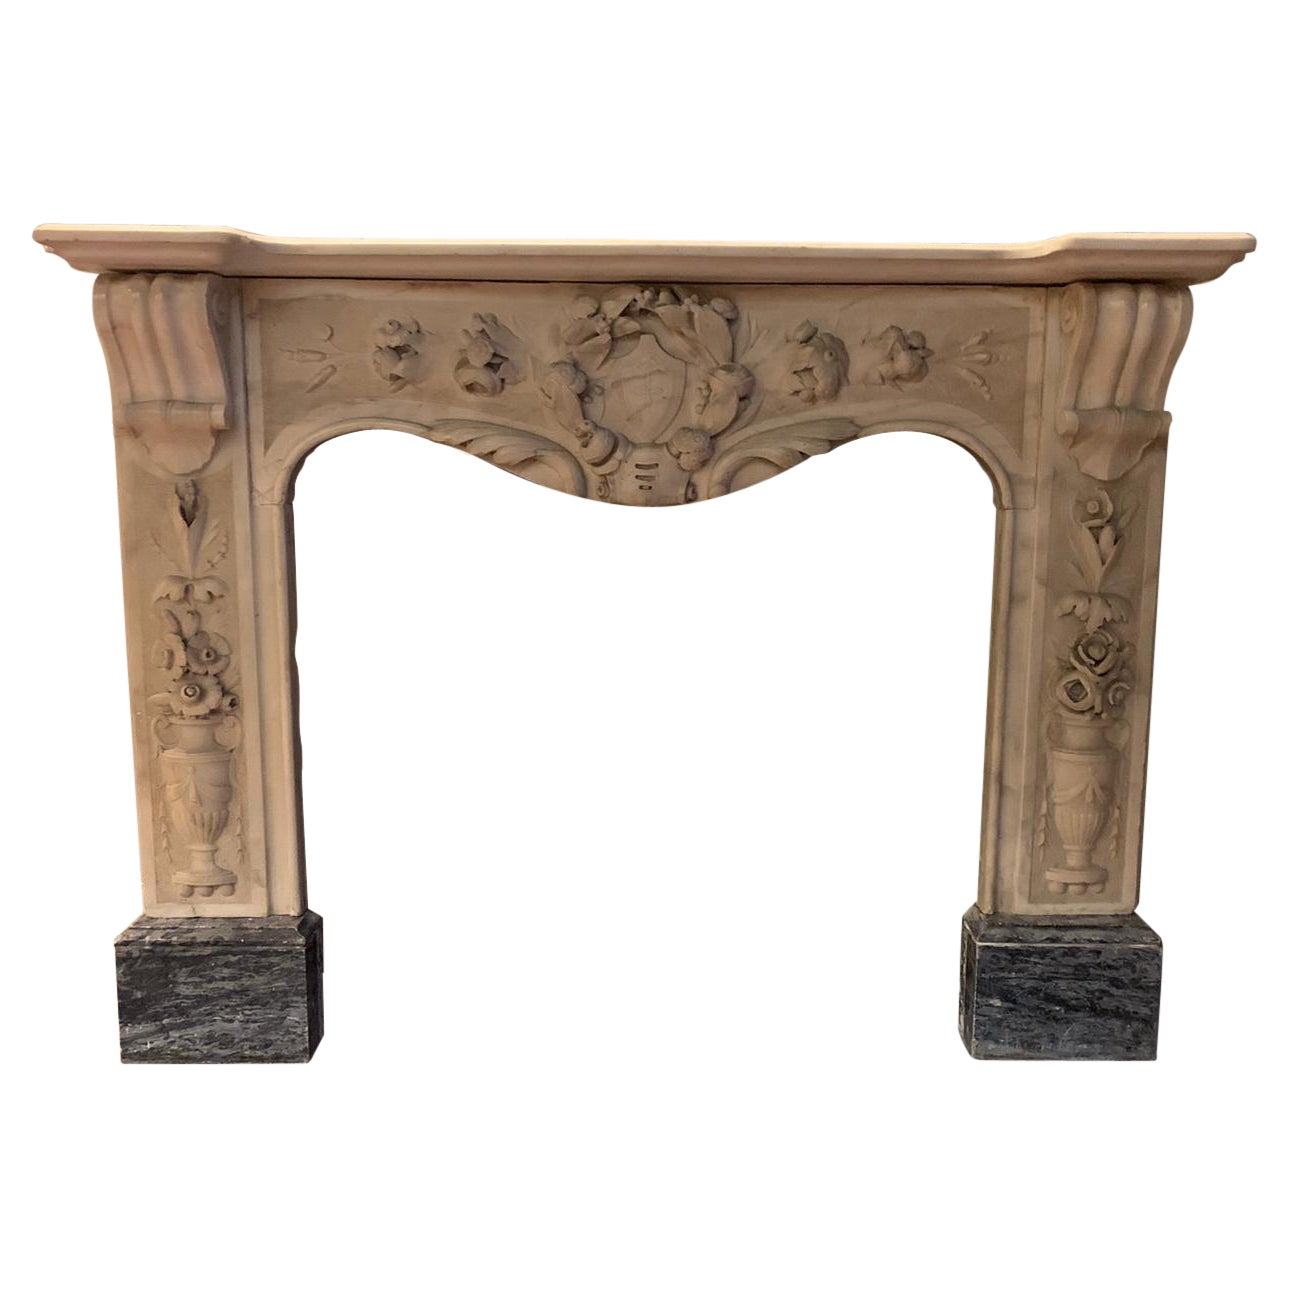 Antique Fireplace Mantle White Carrara Marble, Richly Carved, 19th Century Italy